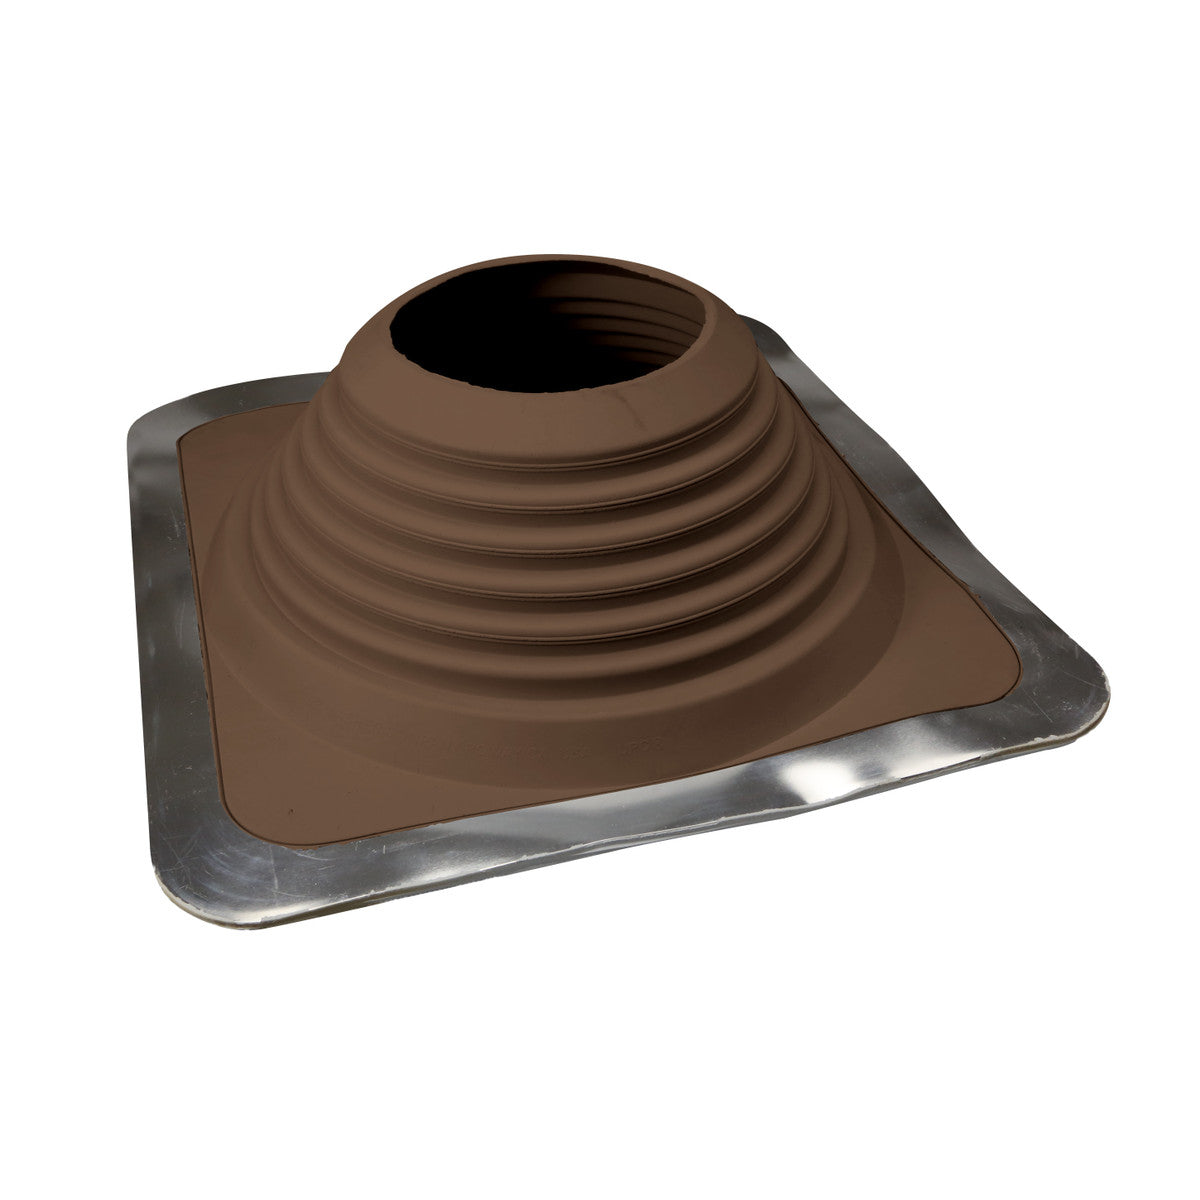 #9 Roofjack Square EPDM Pipe Flashing Boot, Brown